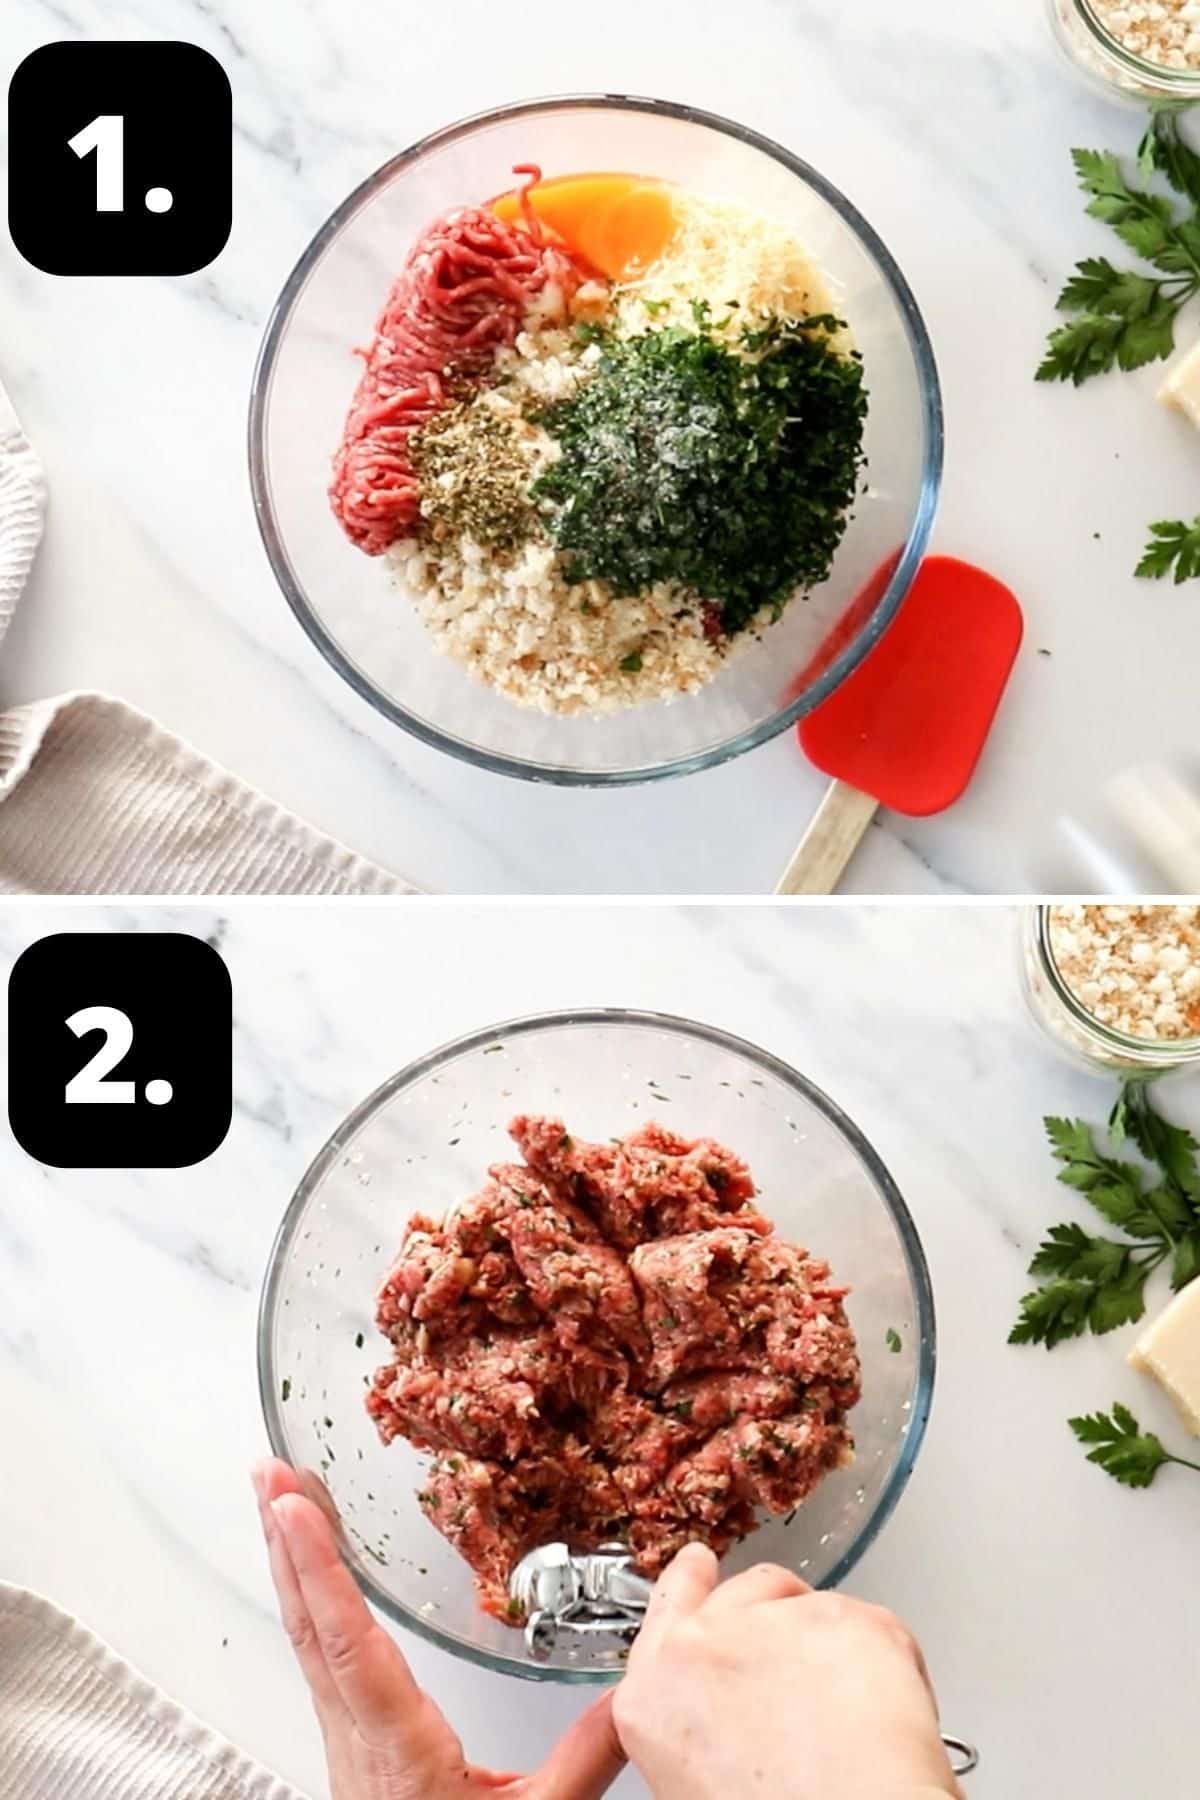 Steps 1-2 of preparing this recipe - adding the ingredients to a bowl and mixing the ingredients ready to scoop and shape into meatballs.